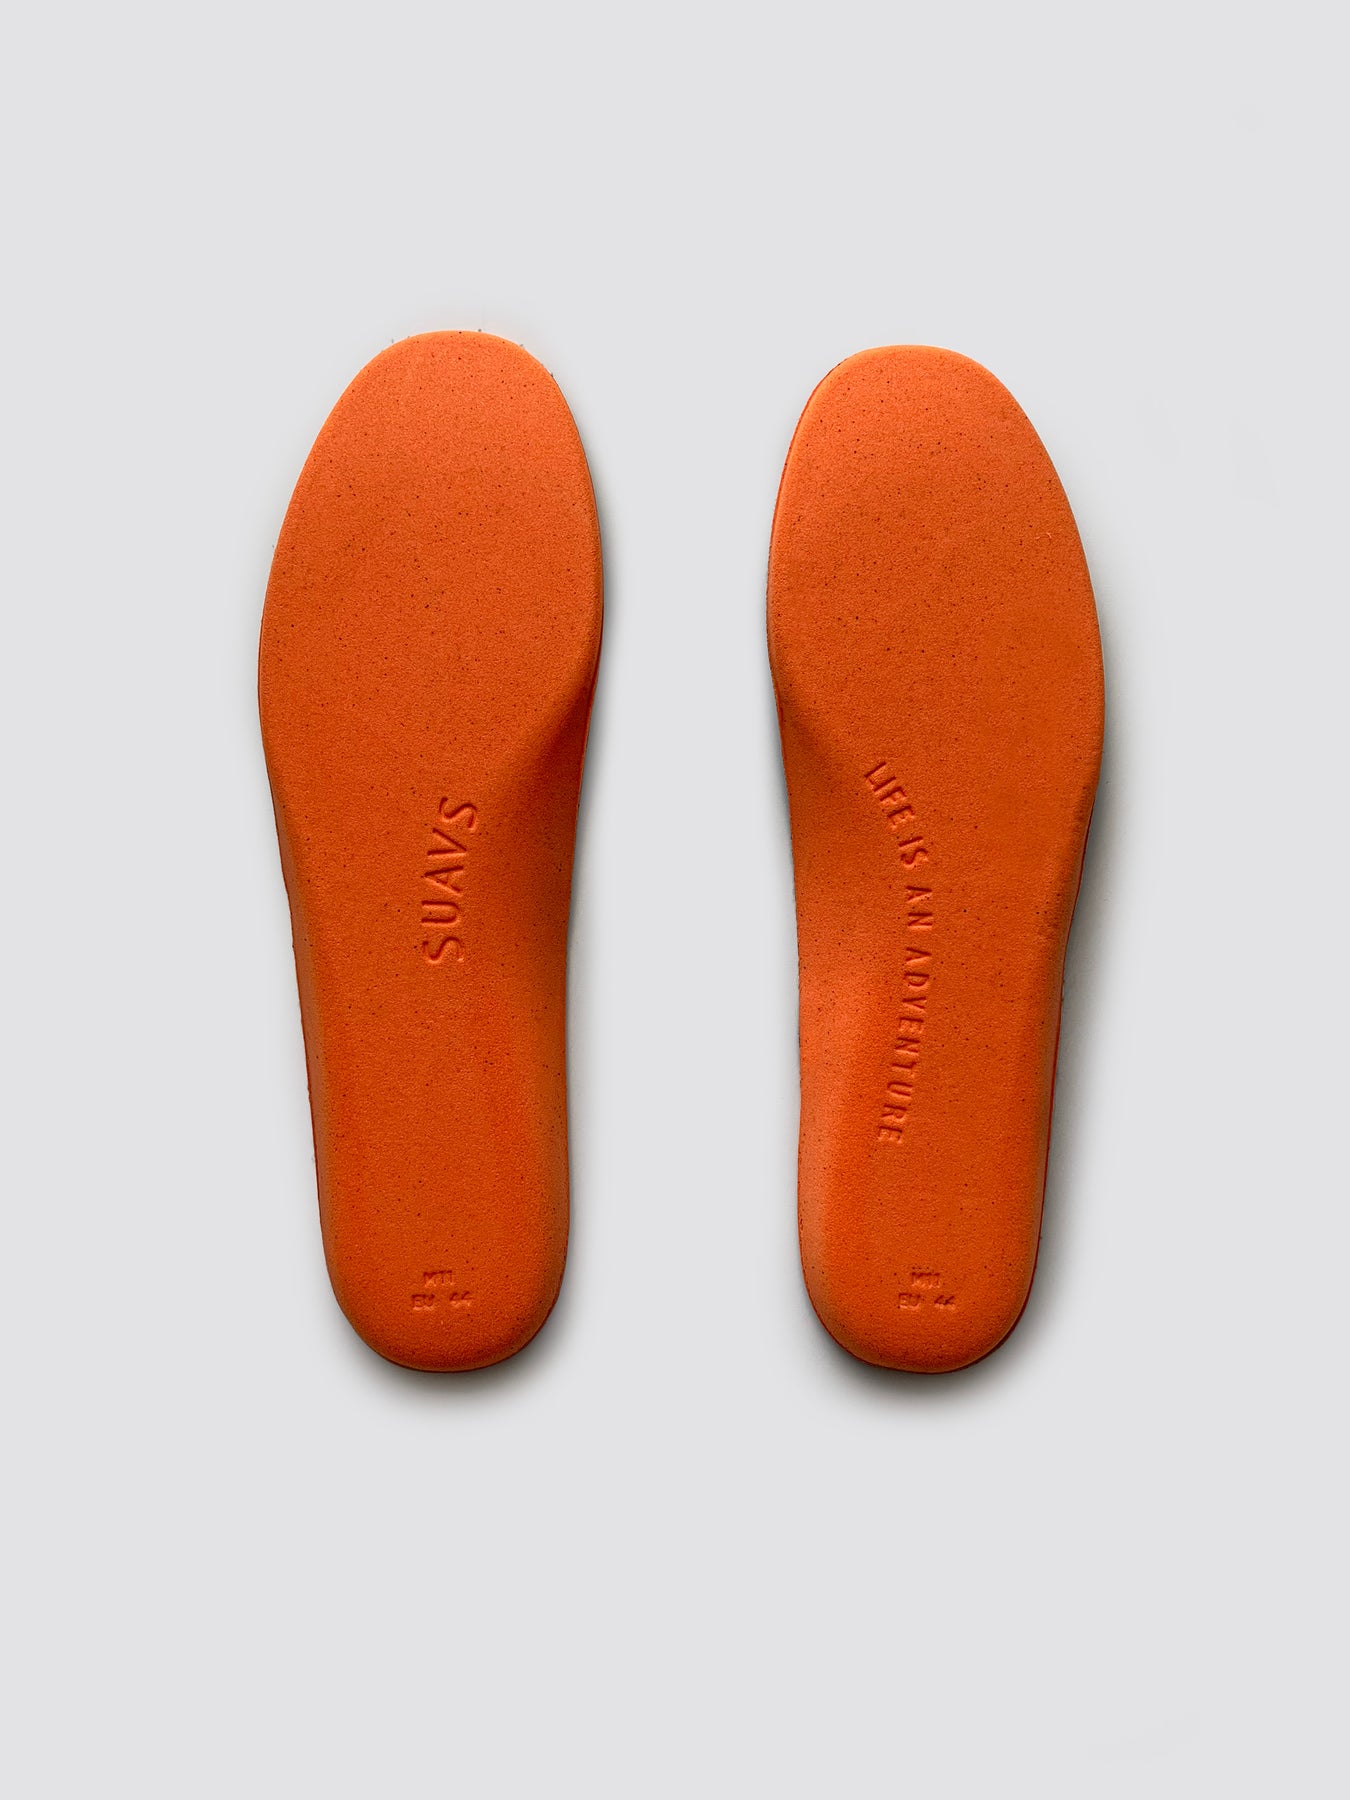 insoles